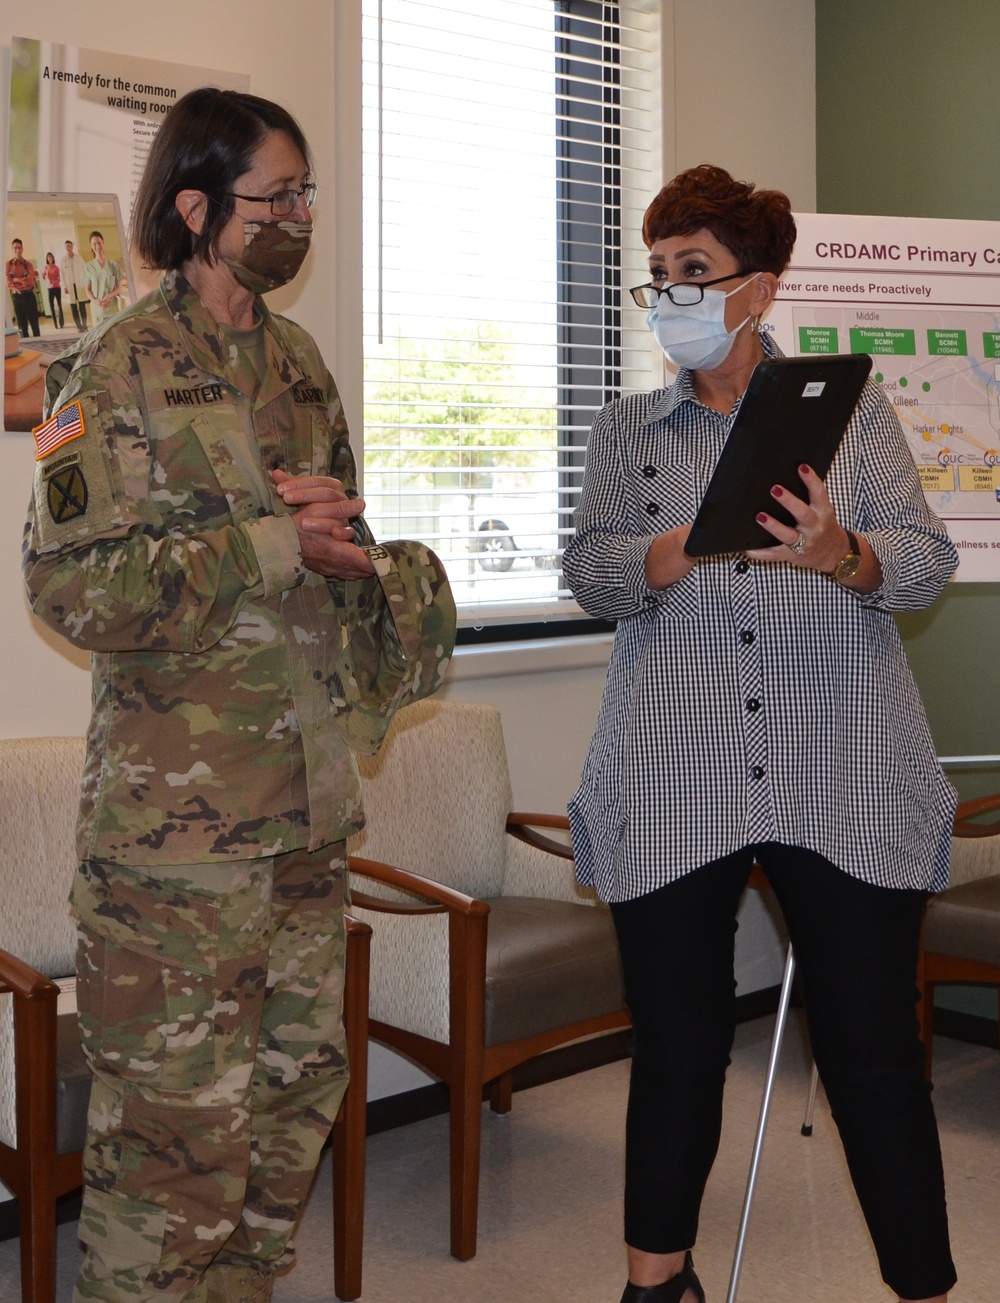 CRDAMC expands virtual health services, becomes top user among military treatment facilities